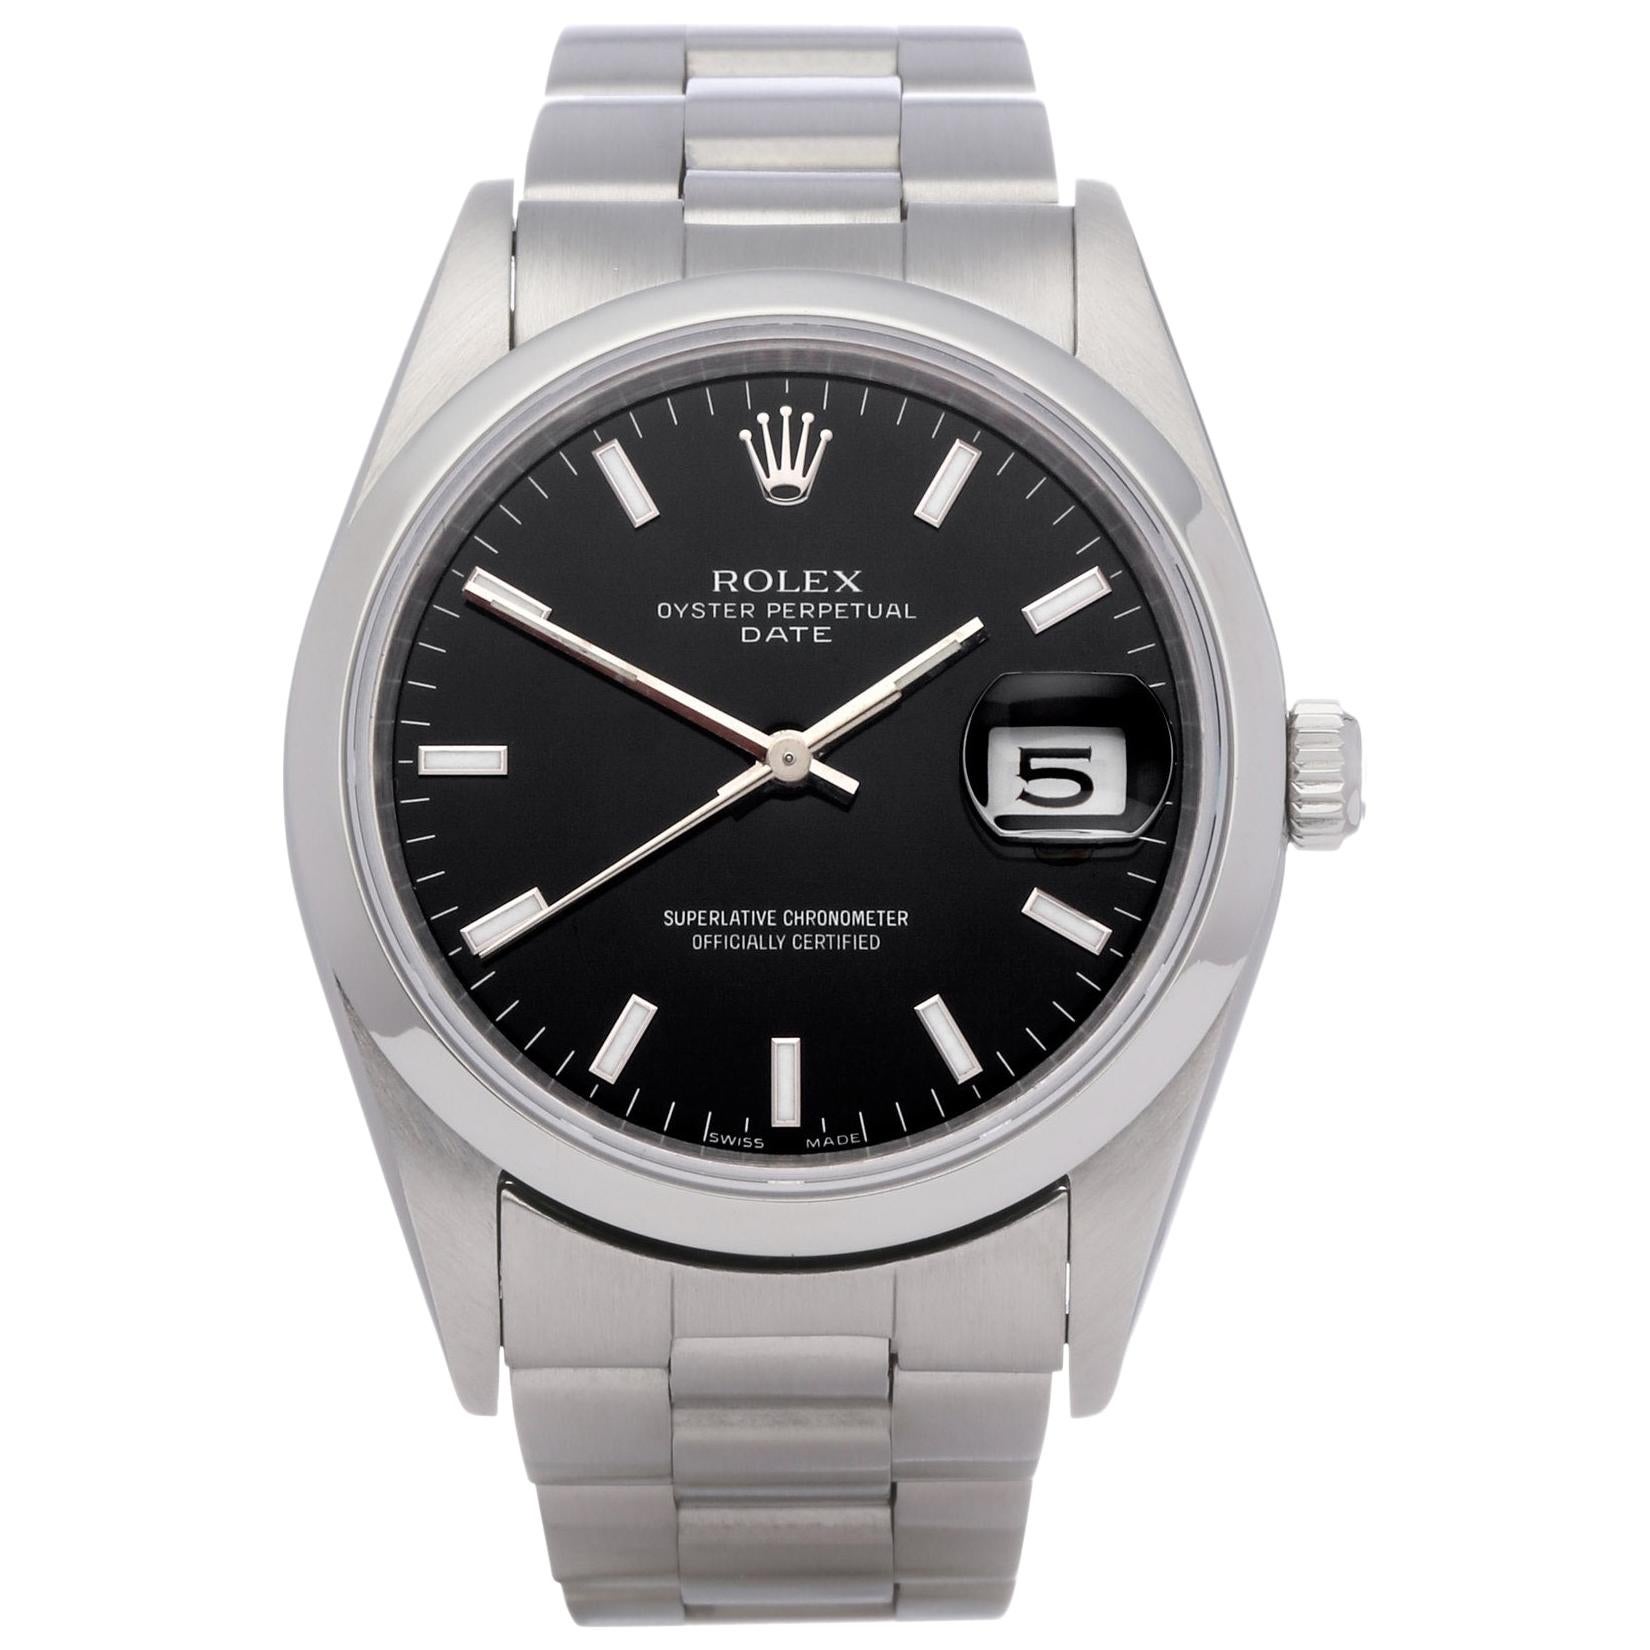 Rolex Oyster Perpetual 15200 Unisex Stainless Steel Date Watch